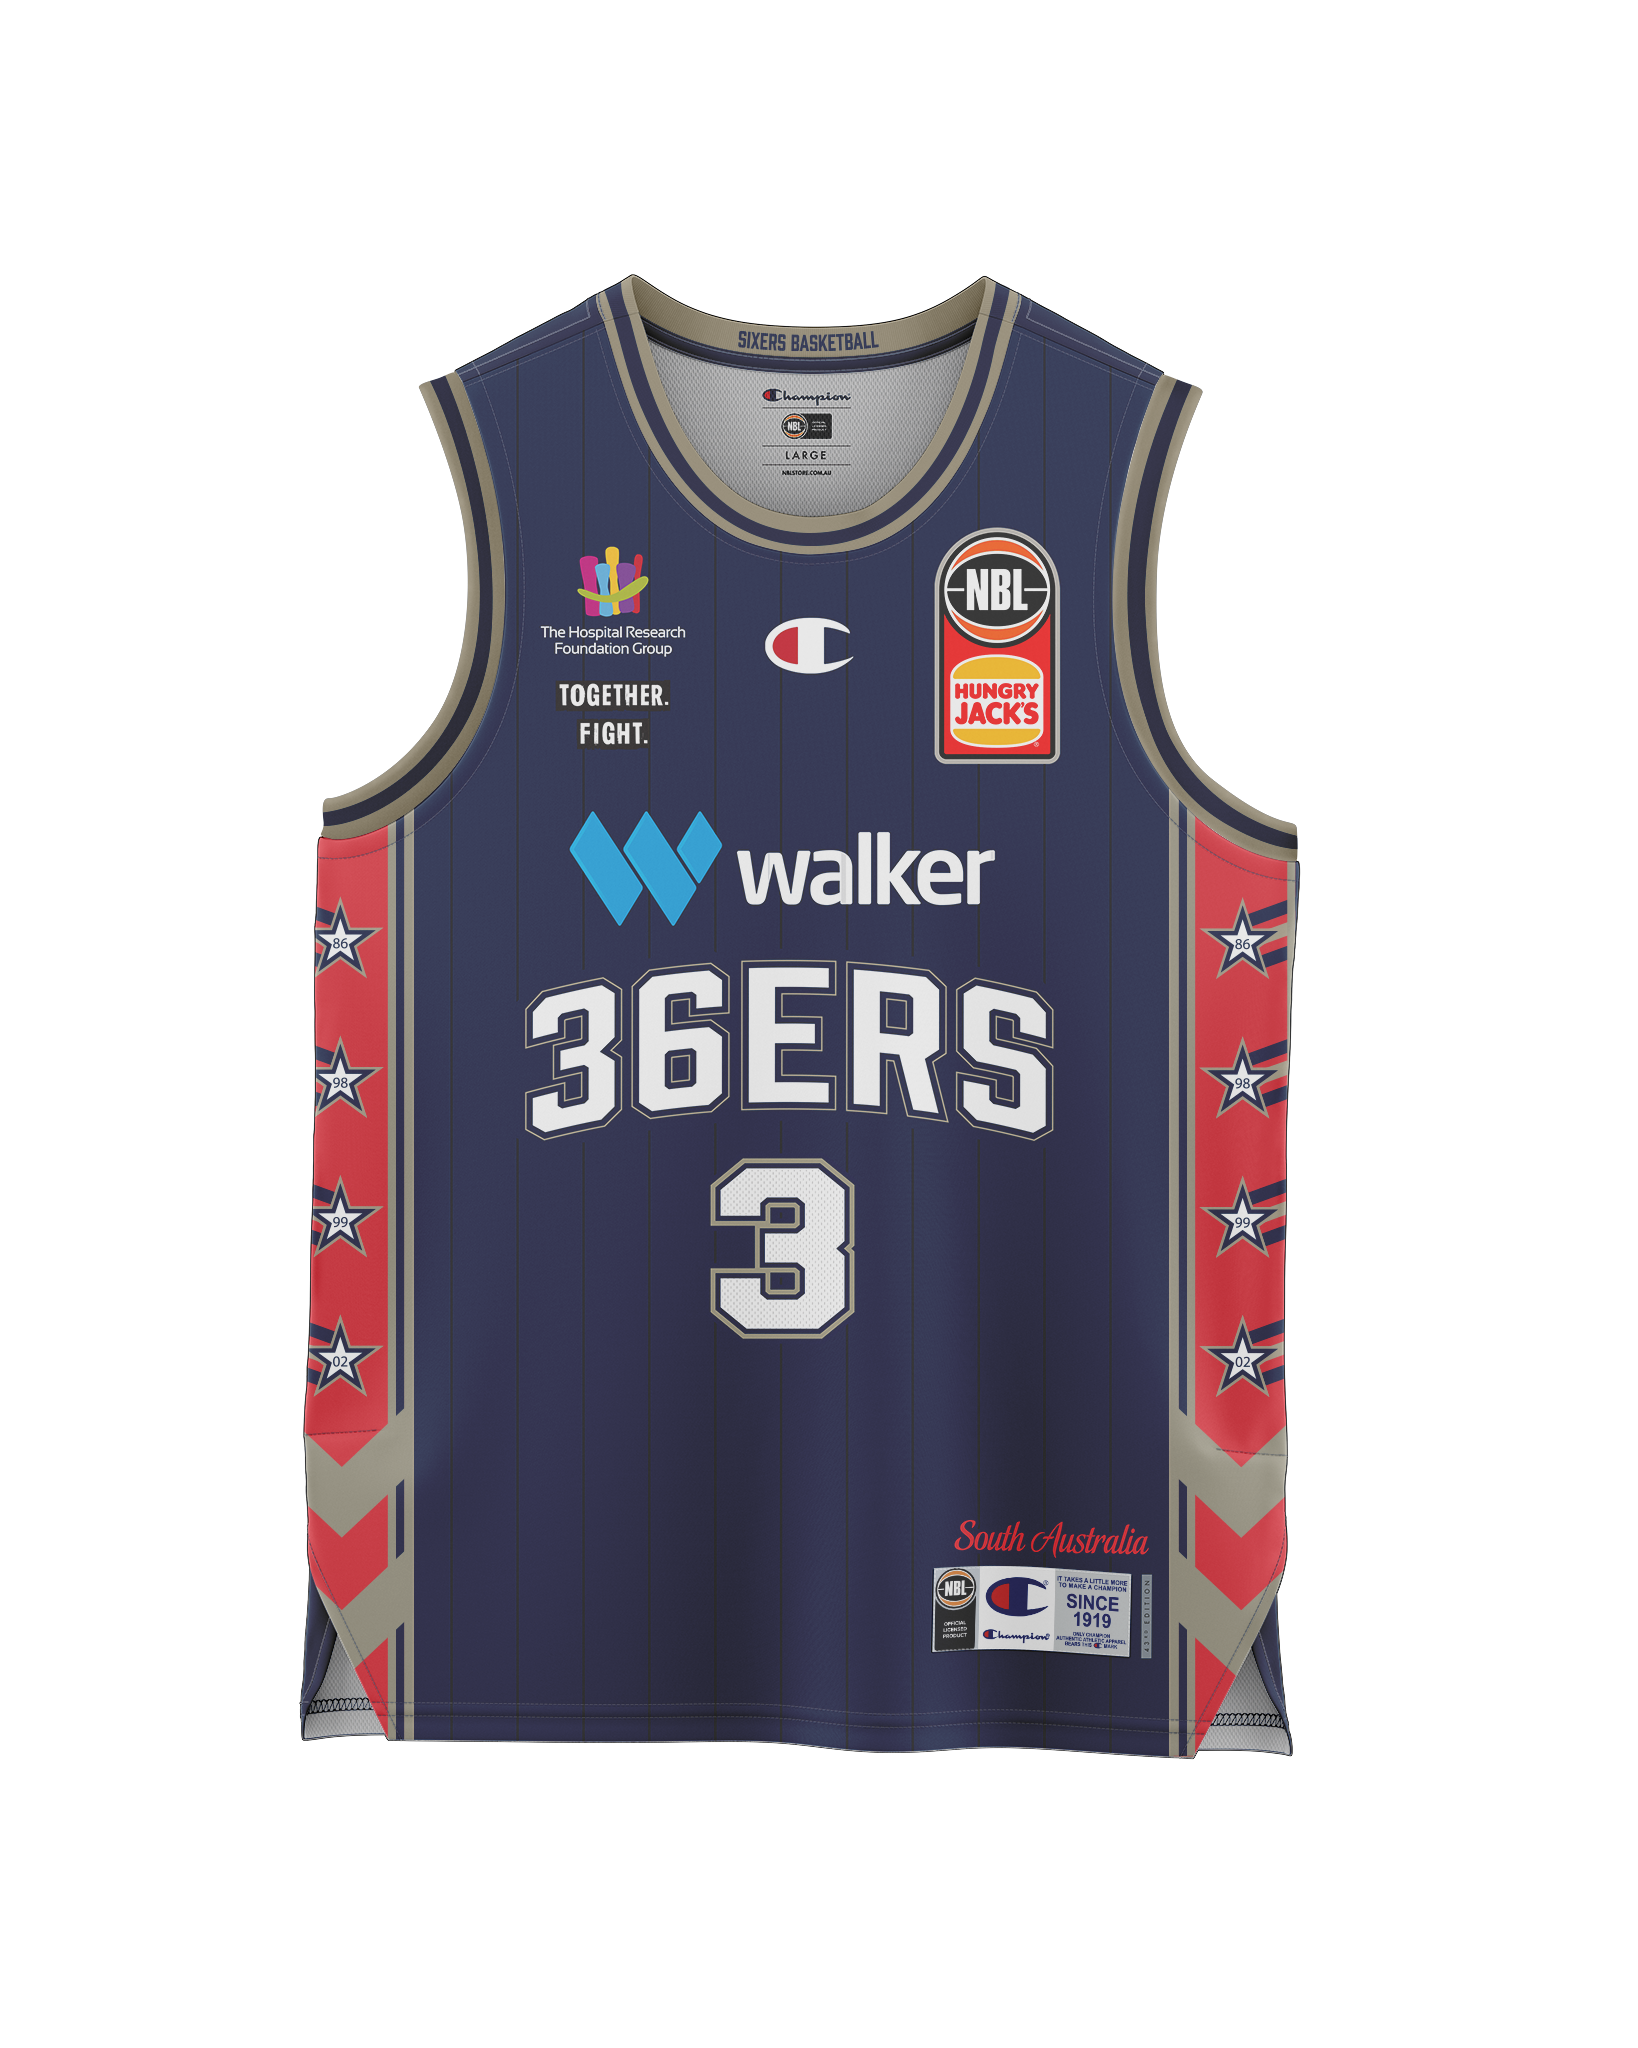 Adelaide 36ers 2021/22 Authentic Adult Home Jersey - Dusty Hannahs - Adelaide 36ers